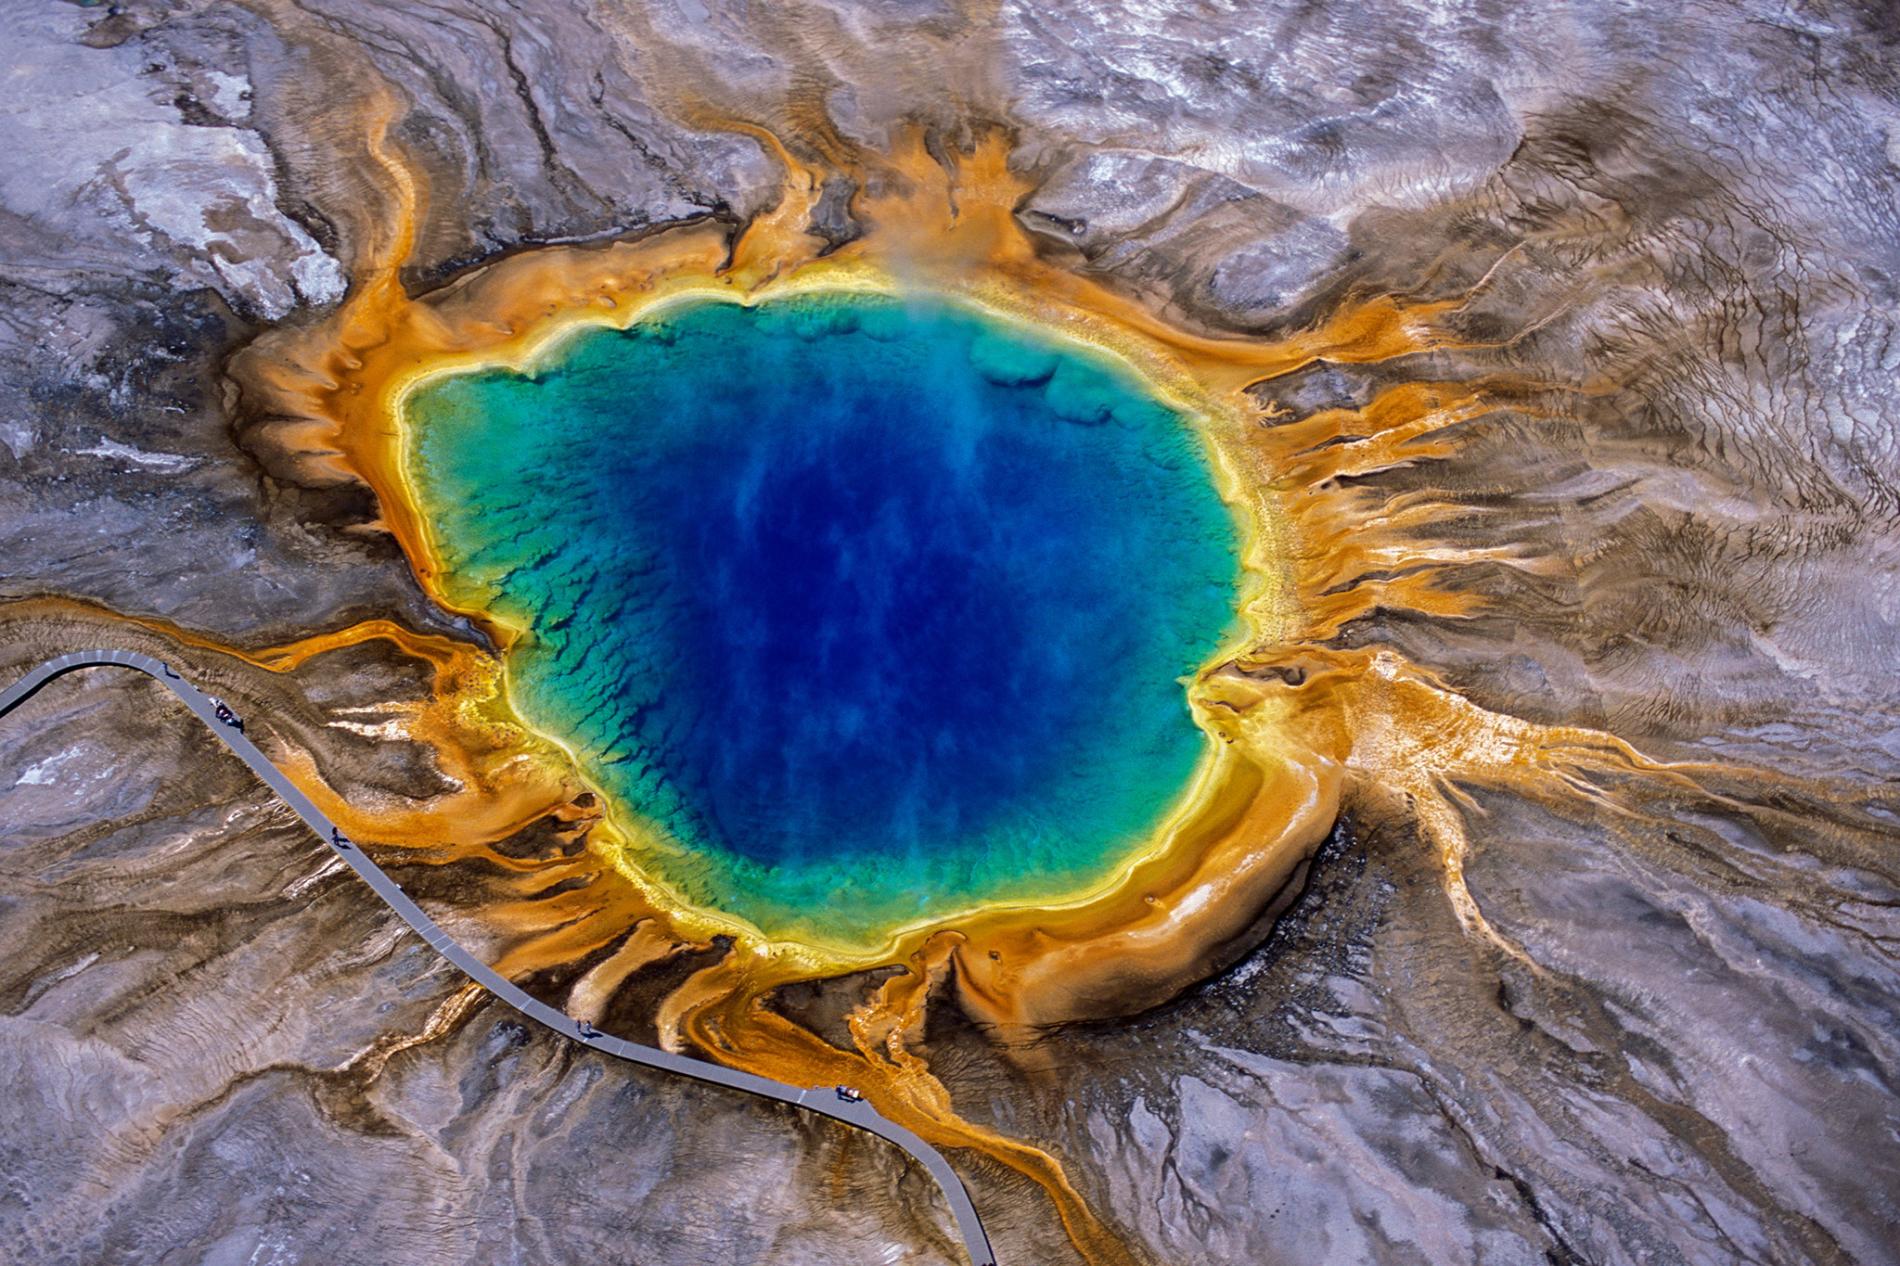 Yellowstone could explode in ten years